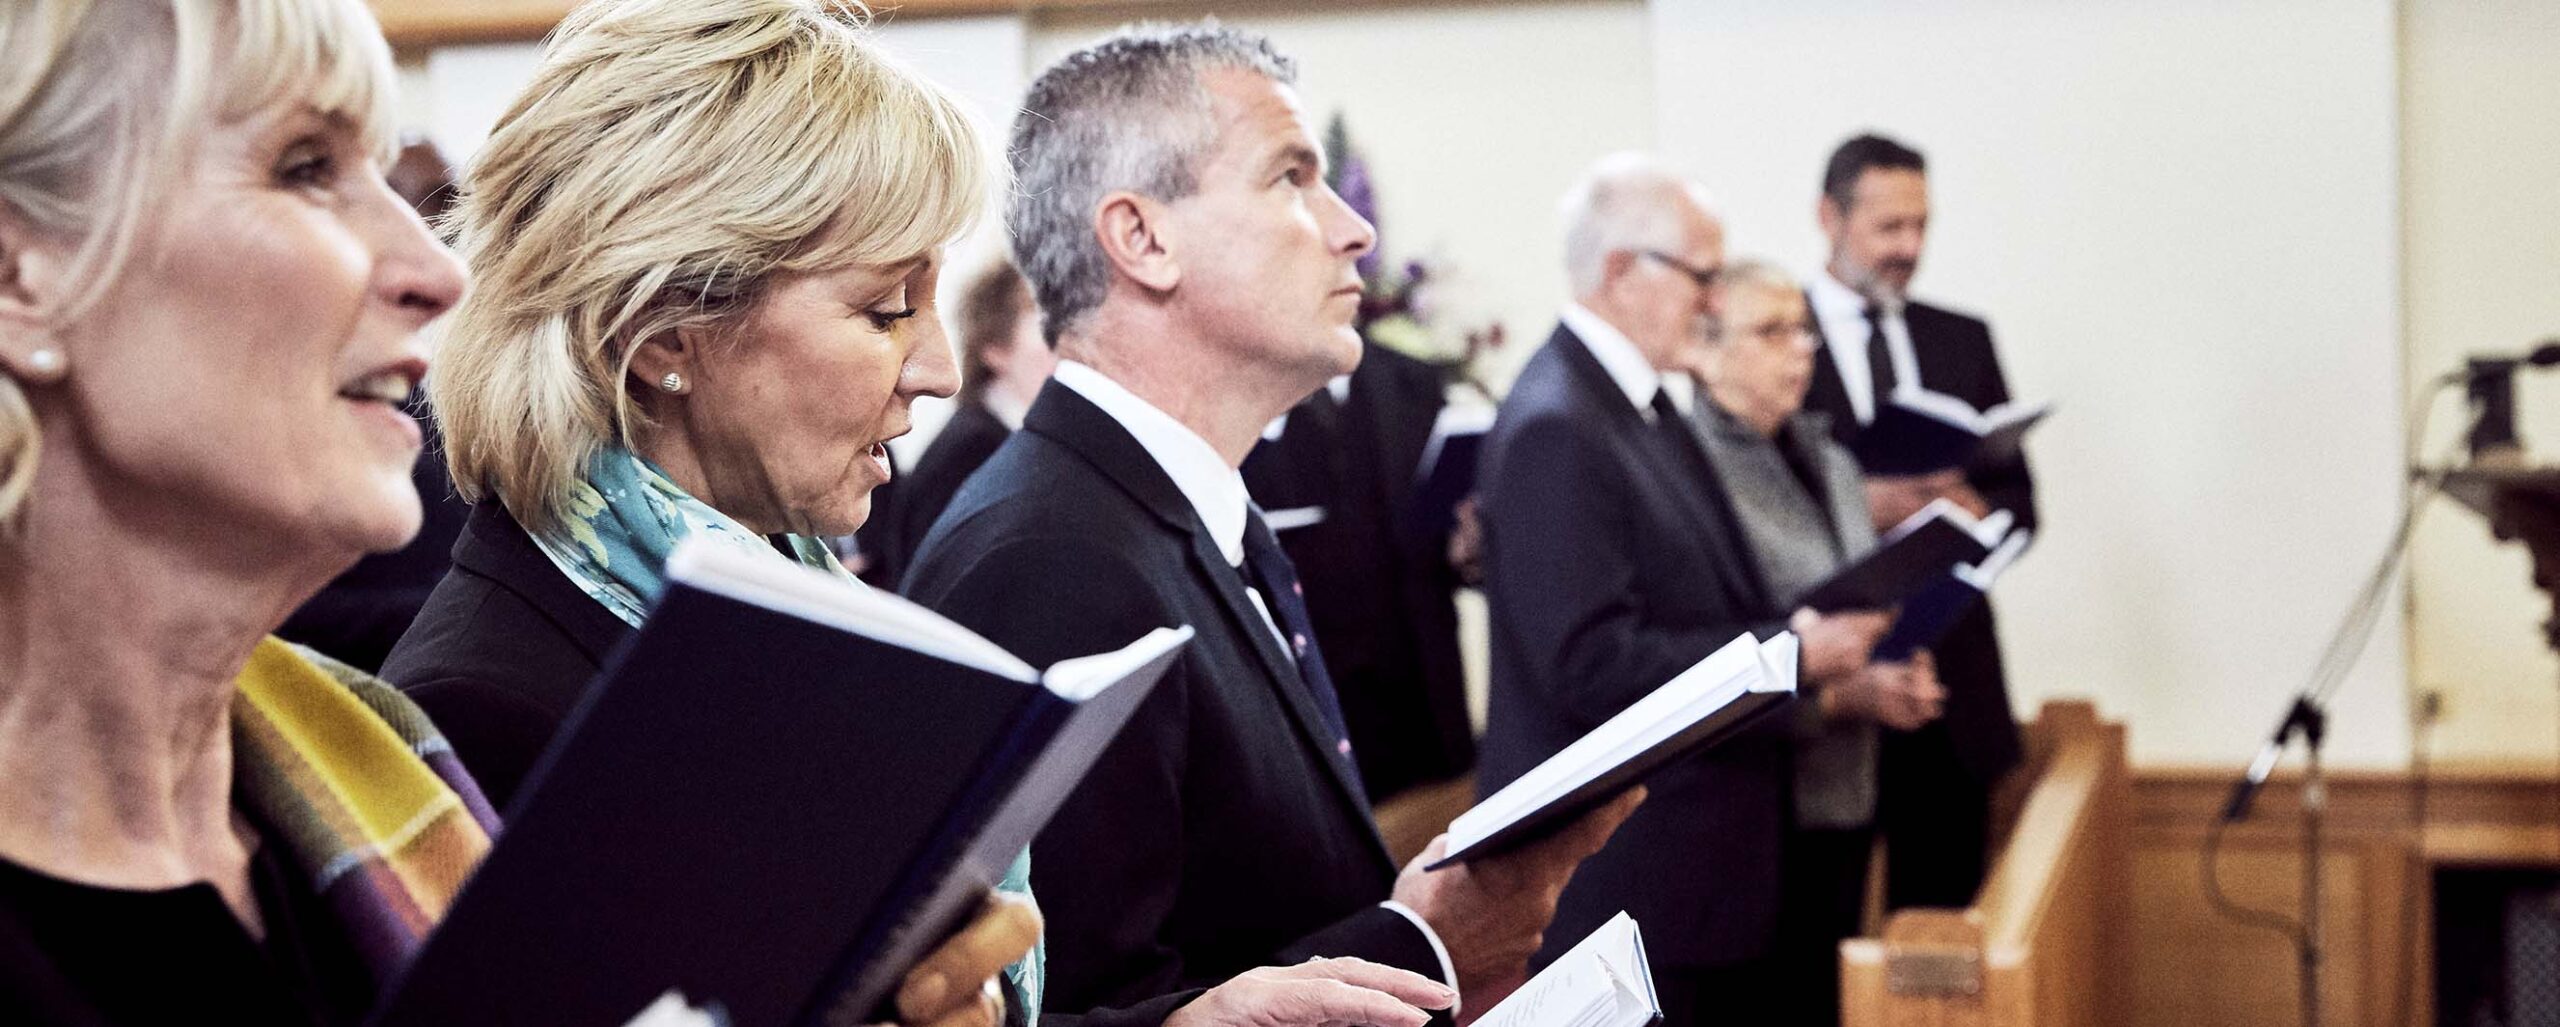 People singing a hymn at a funeral service